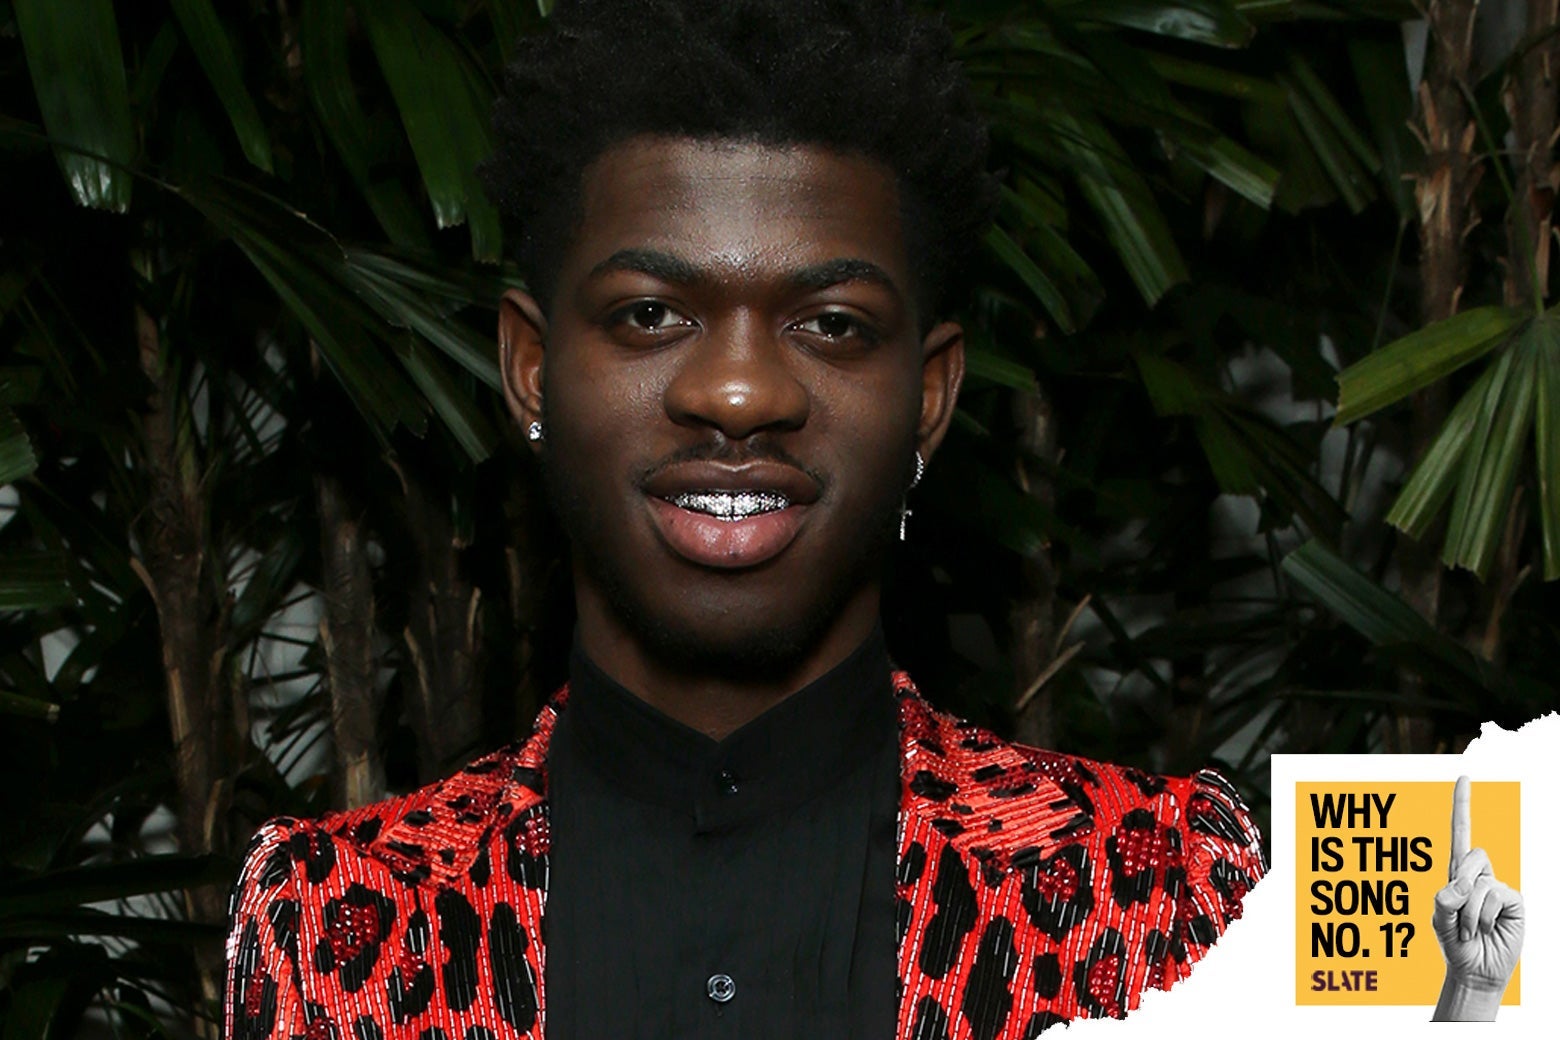 Collage of Lil Nas X smiling in a red leopard print blazer at a red carpet event with the "Why Is This Song No. 1" logo in the bottom right corner